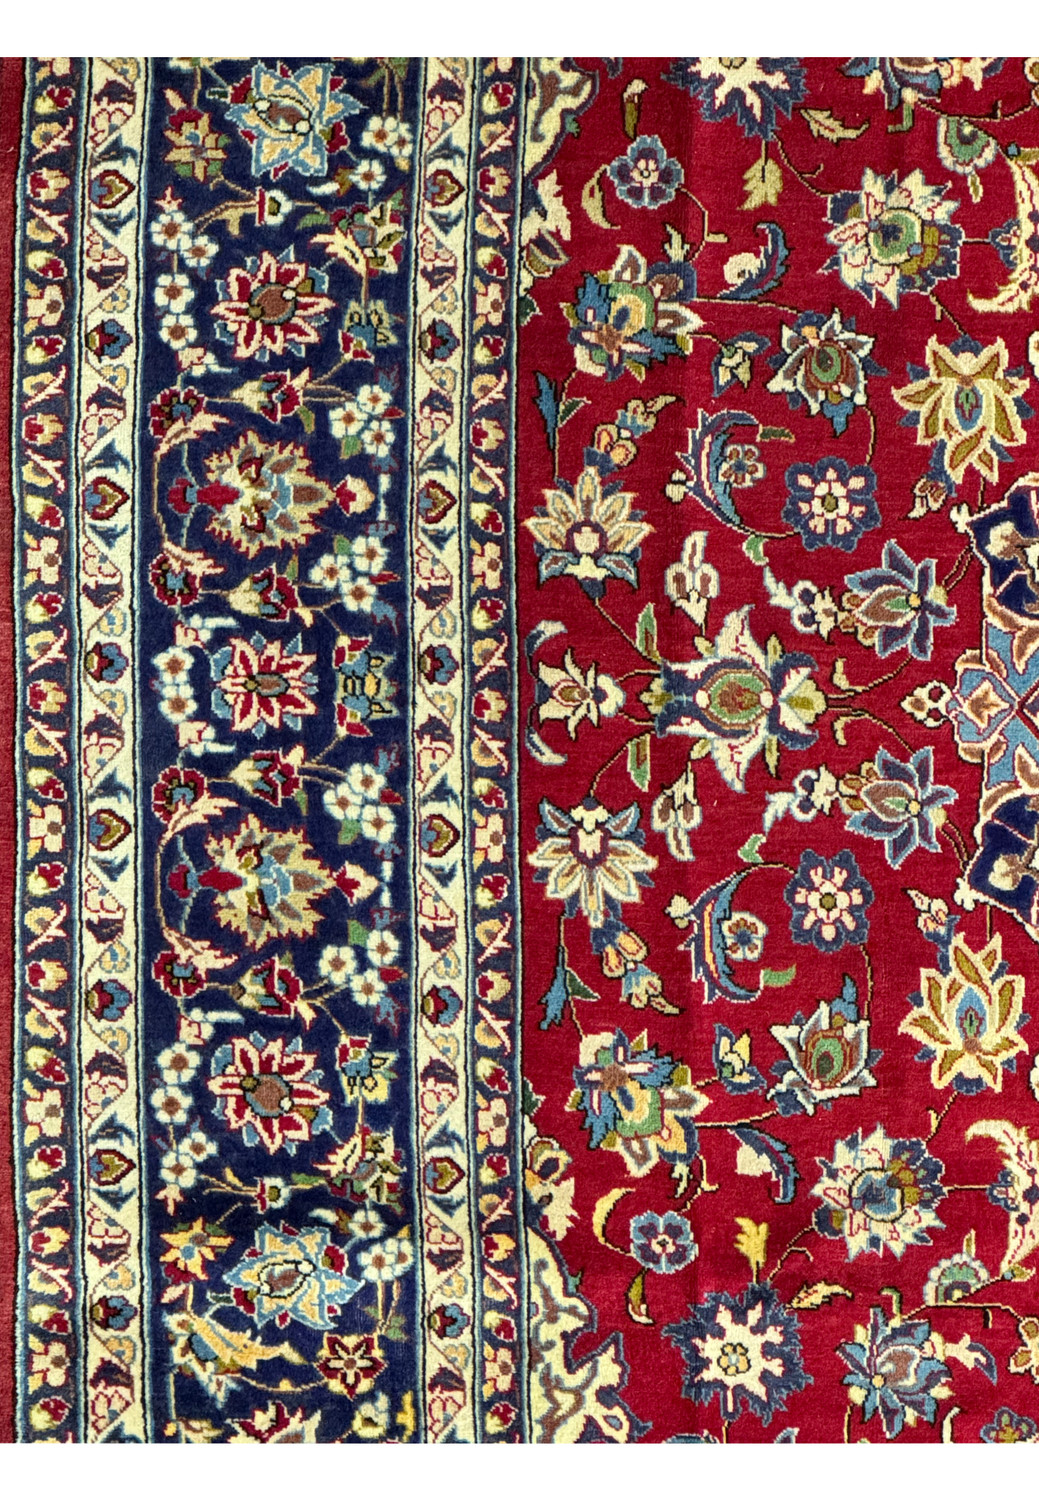 A zoomed-in view of the Persian Isfahan rug's edge, displaying the intricate border patterns with reciprocal trefoil designs in white, blue, and gold, against a dark navy background